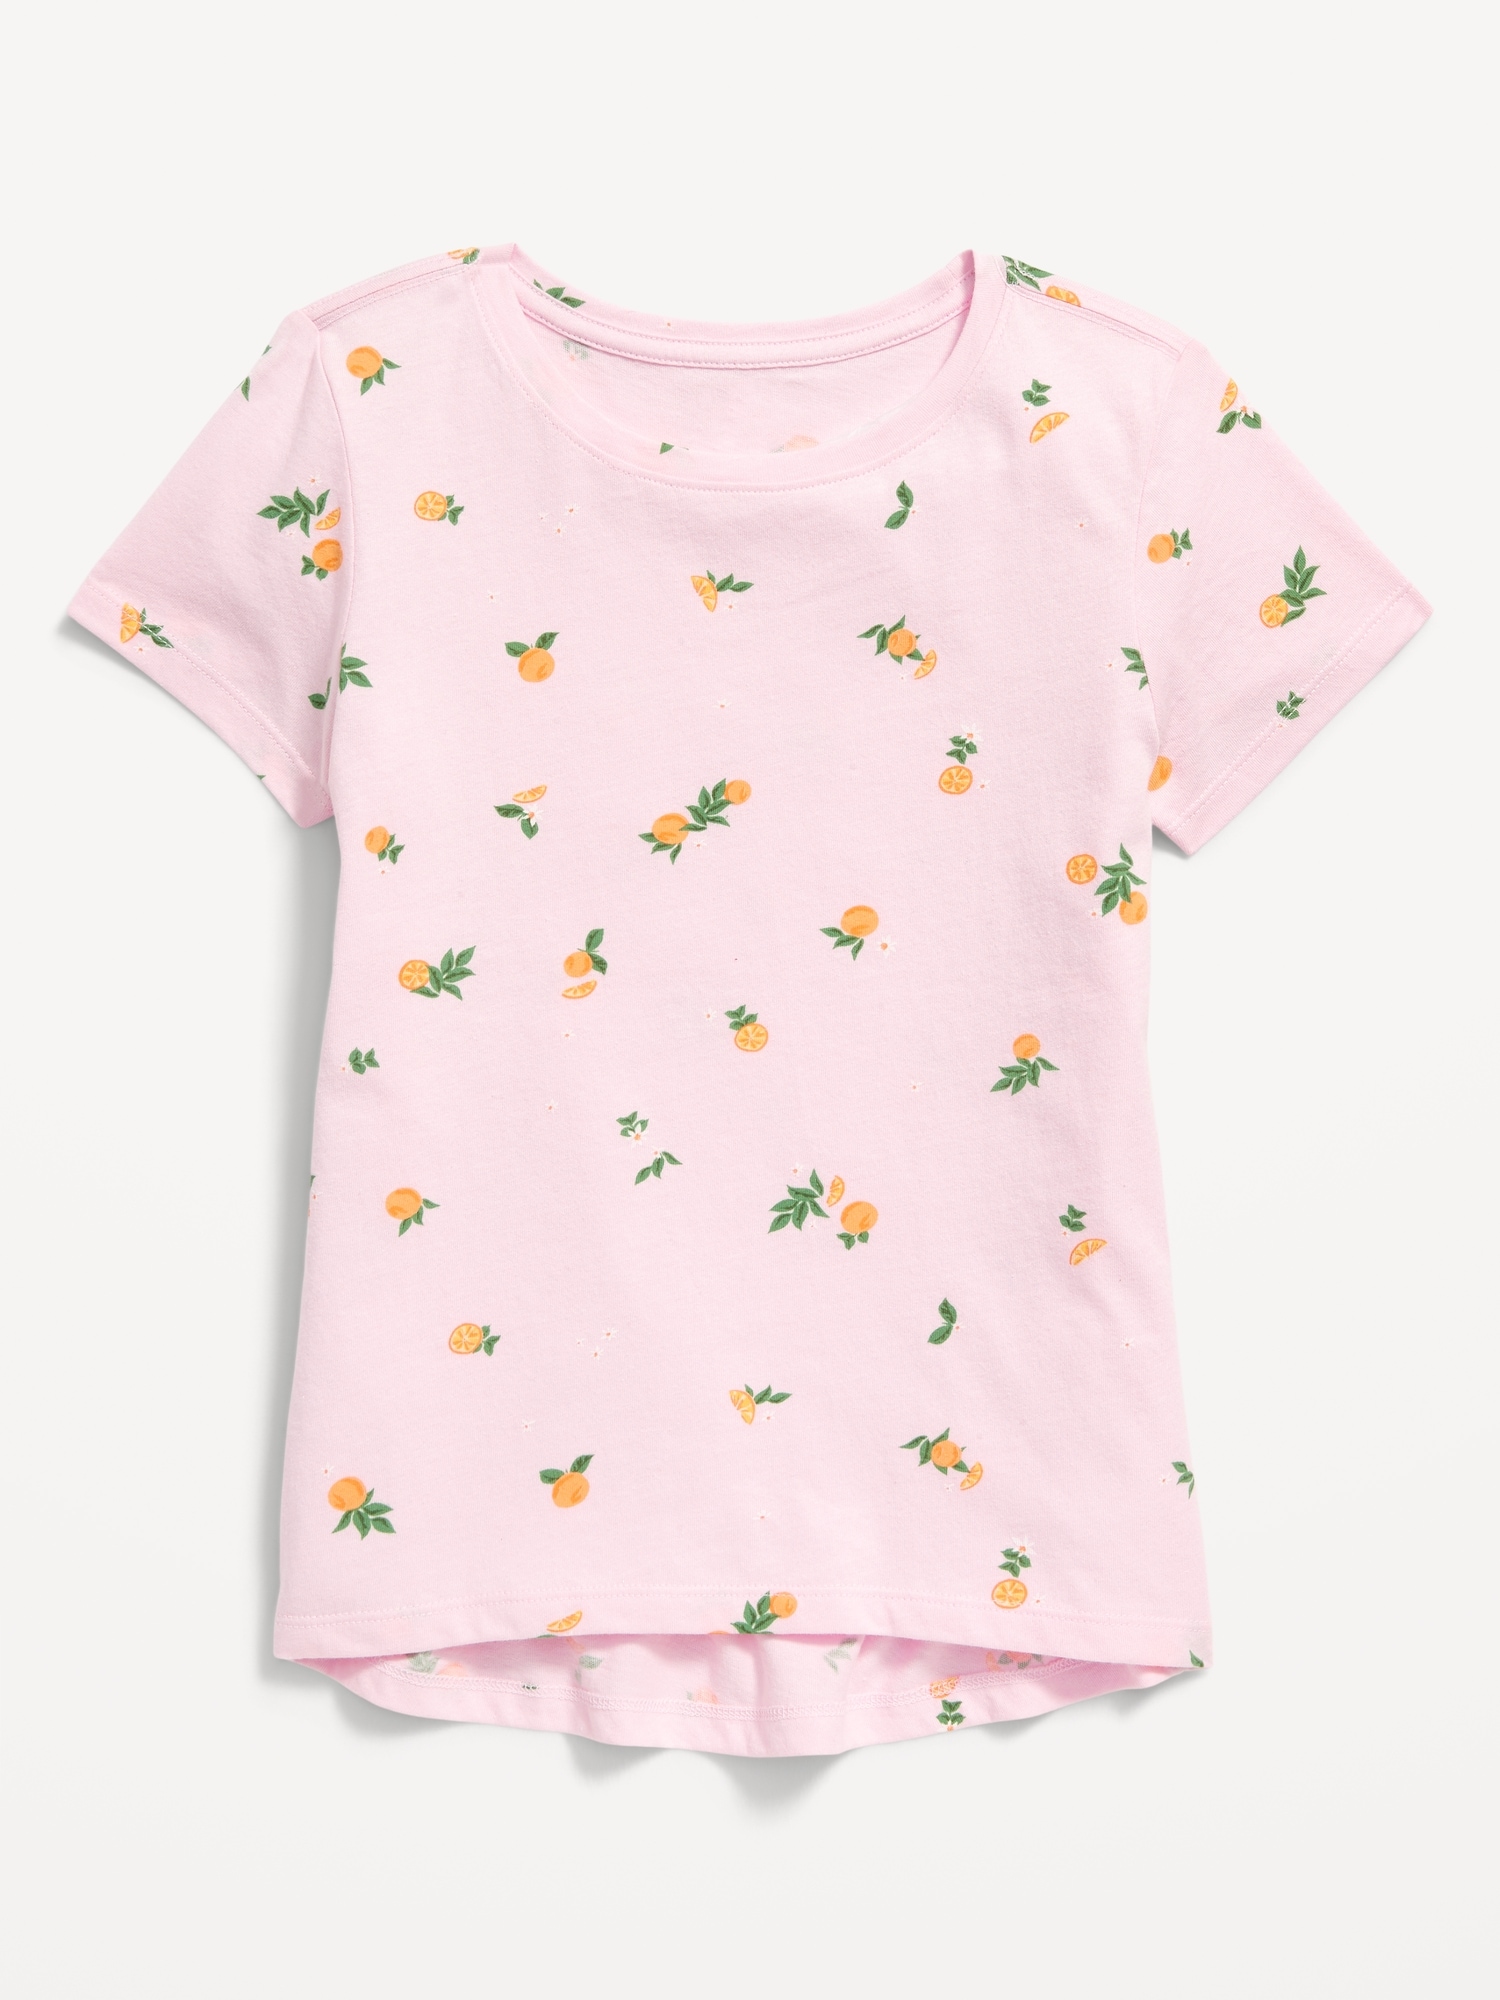 Old Navy Softest Printed T-Shirt for Girls pink. 1